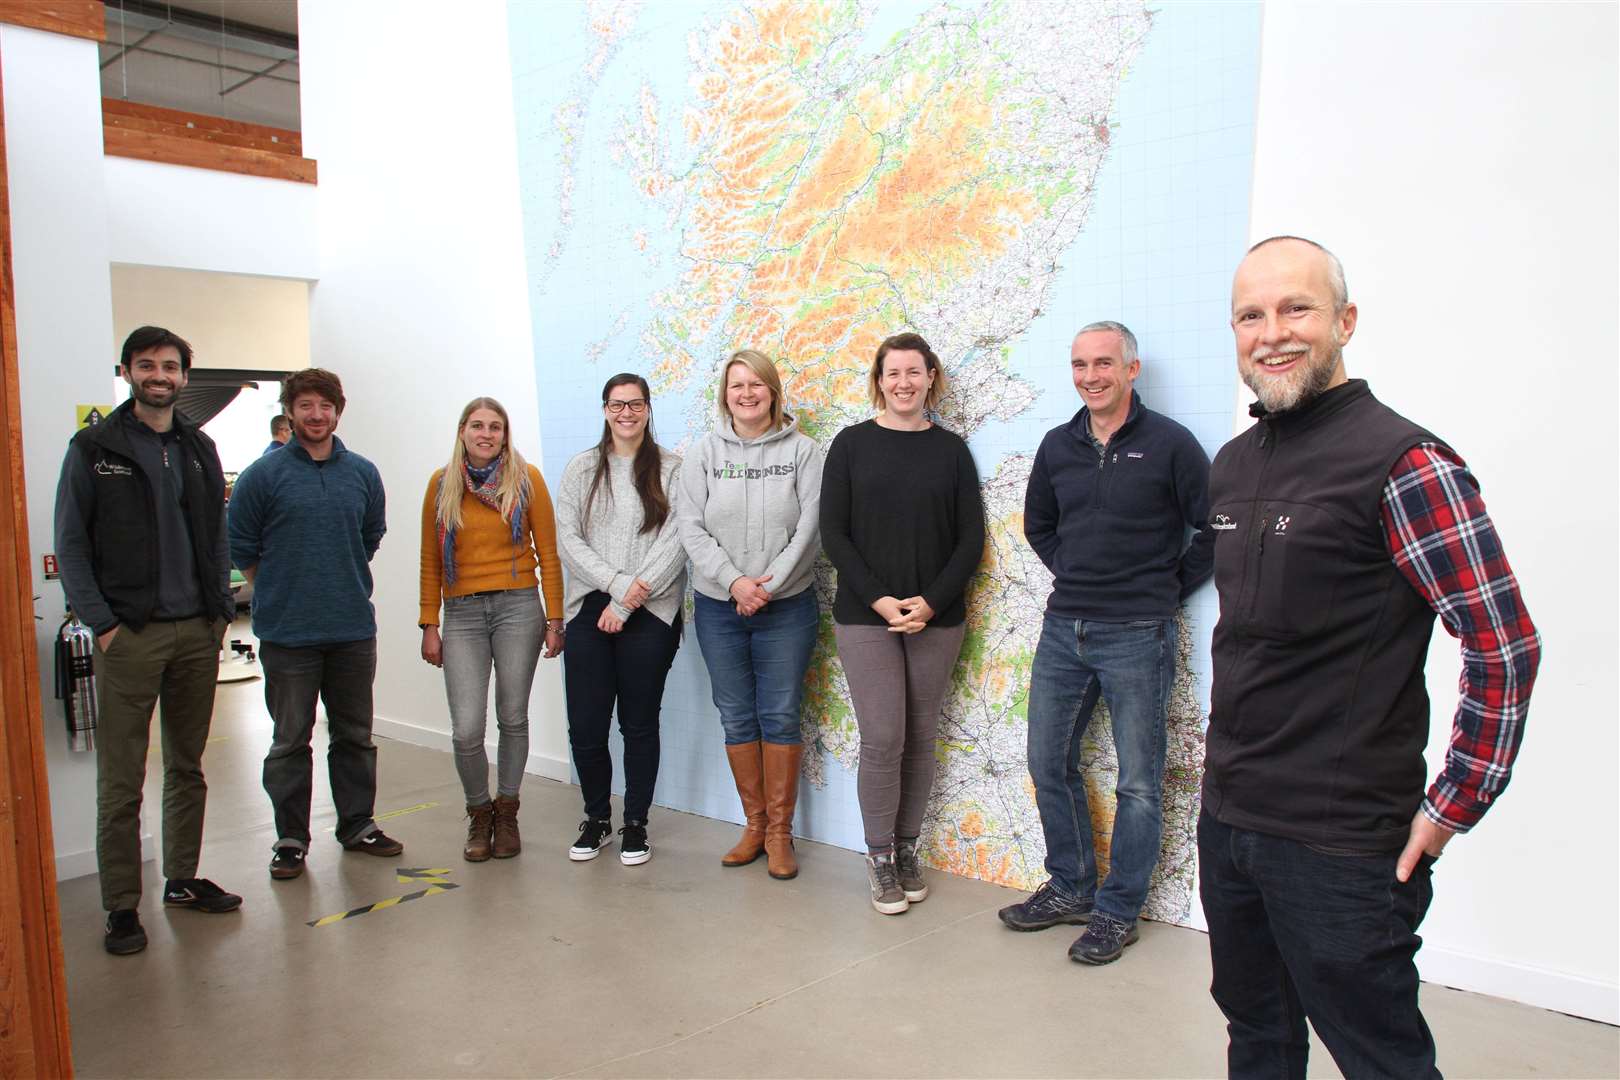 Karl Thurlow, head of business operations (right) with other Wilderness Scotland staff at their Dalfaber base.